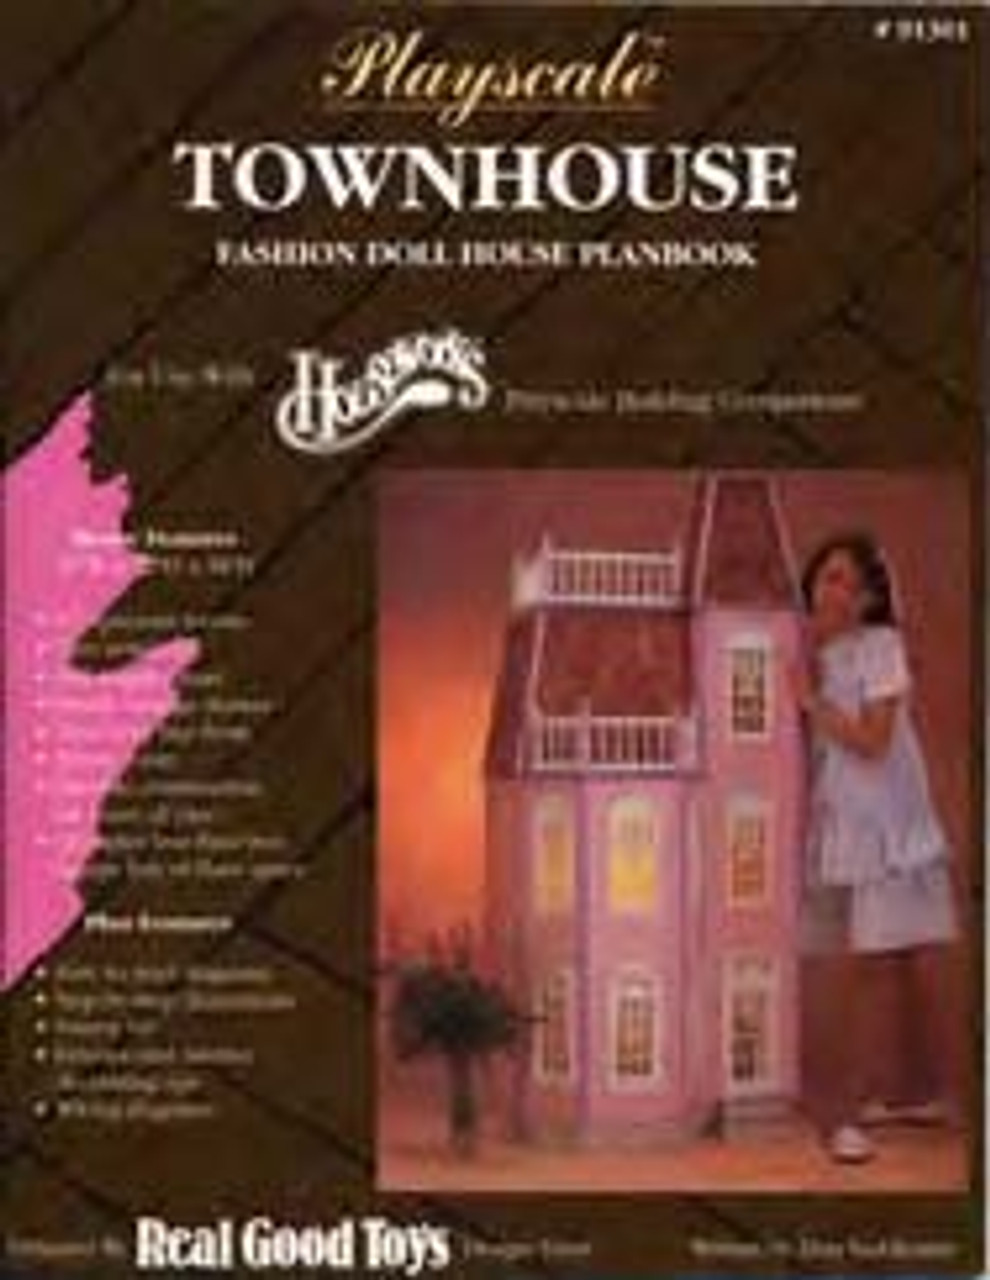 Playscale Townhouse - Victorian Planbook